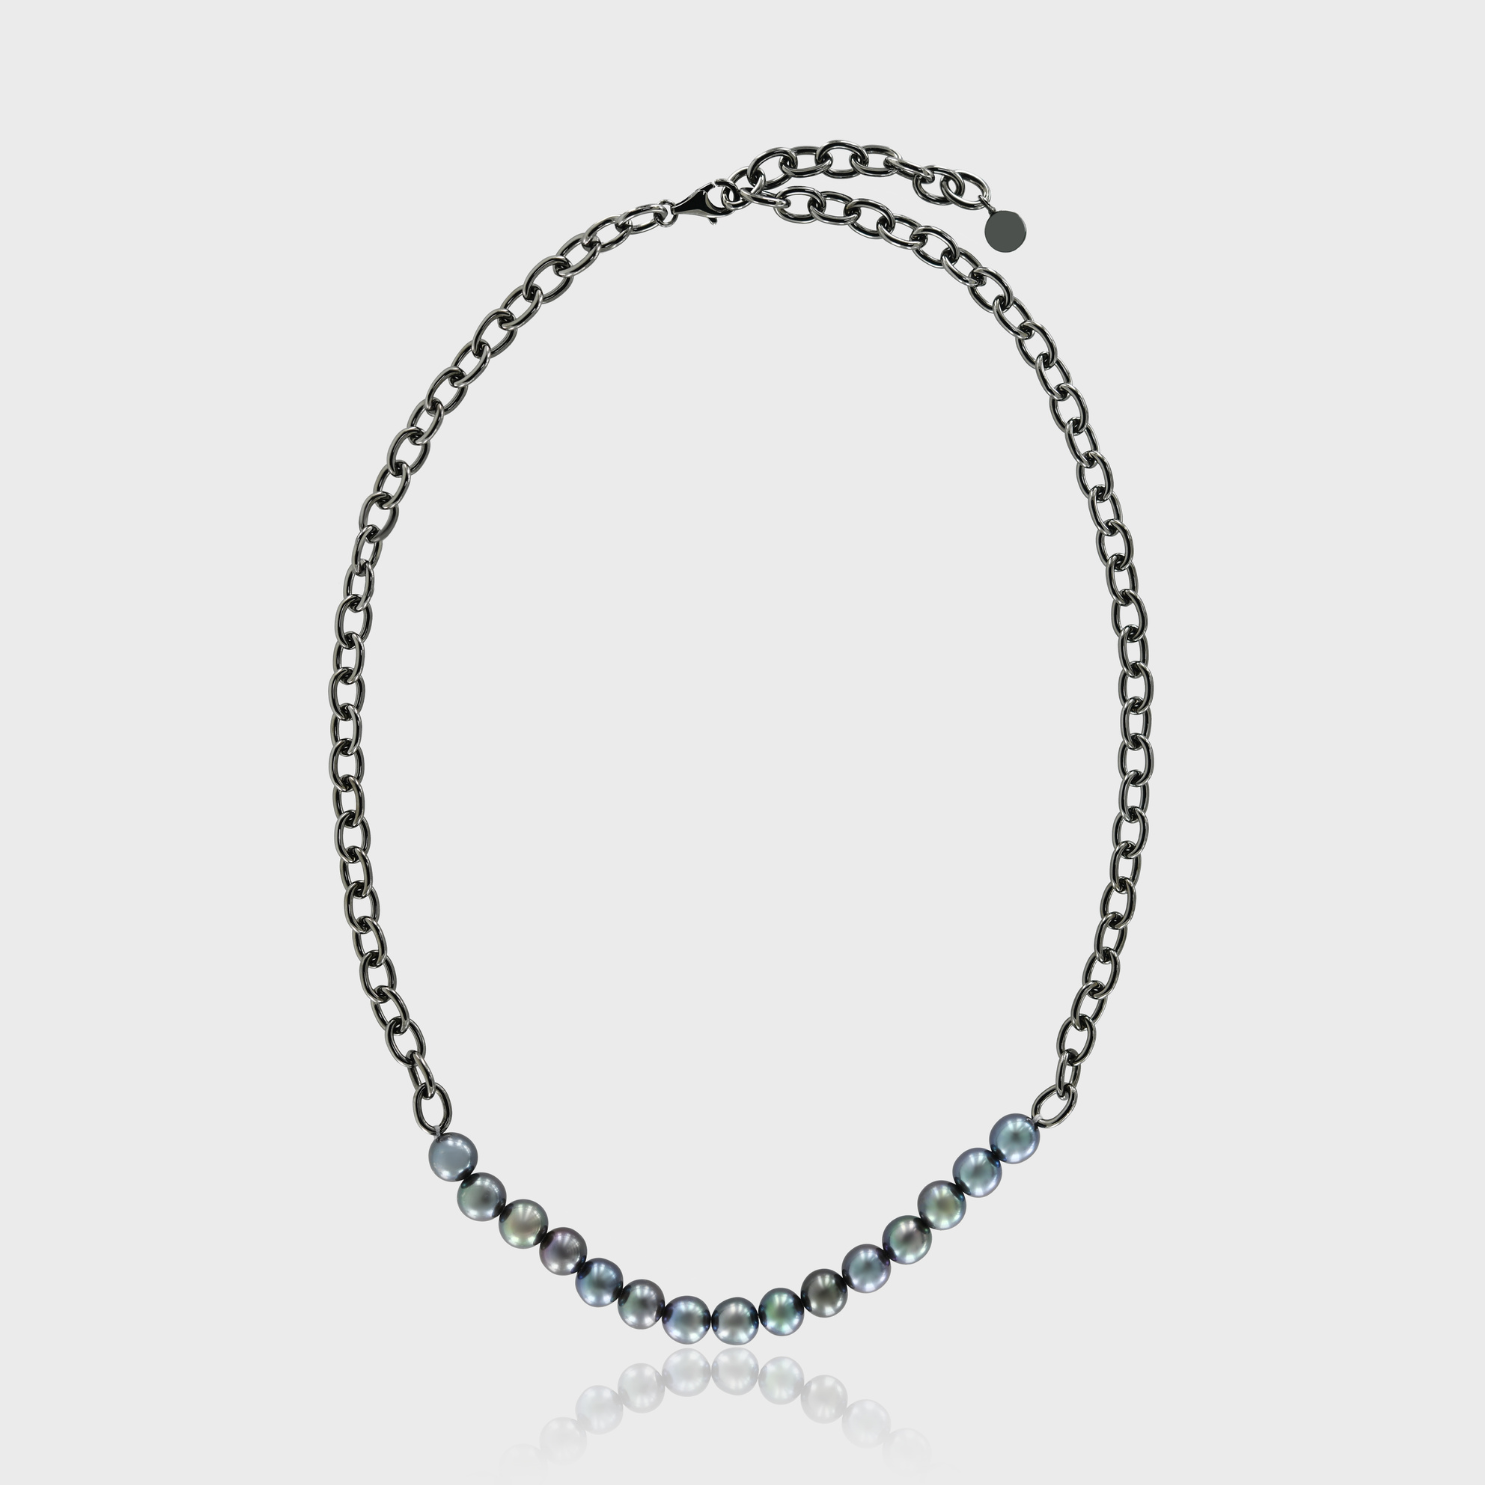 Player Bloq Necklace, 925 Sterling Silver with Black Rhodium